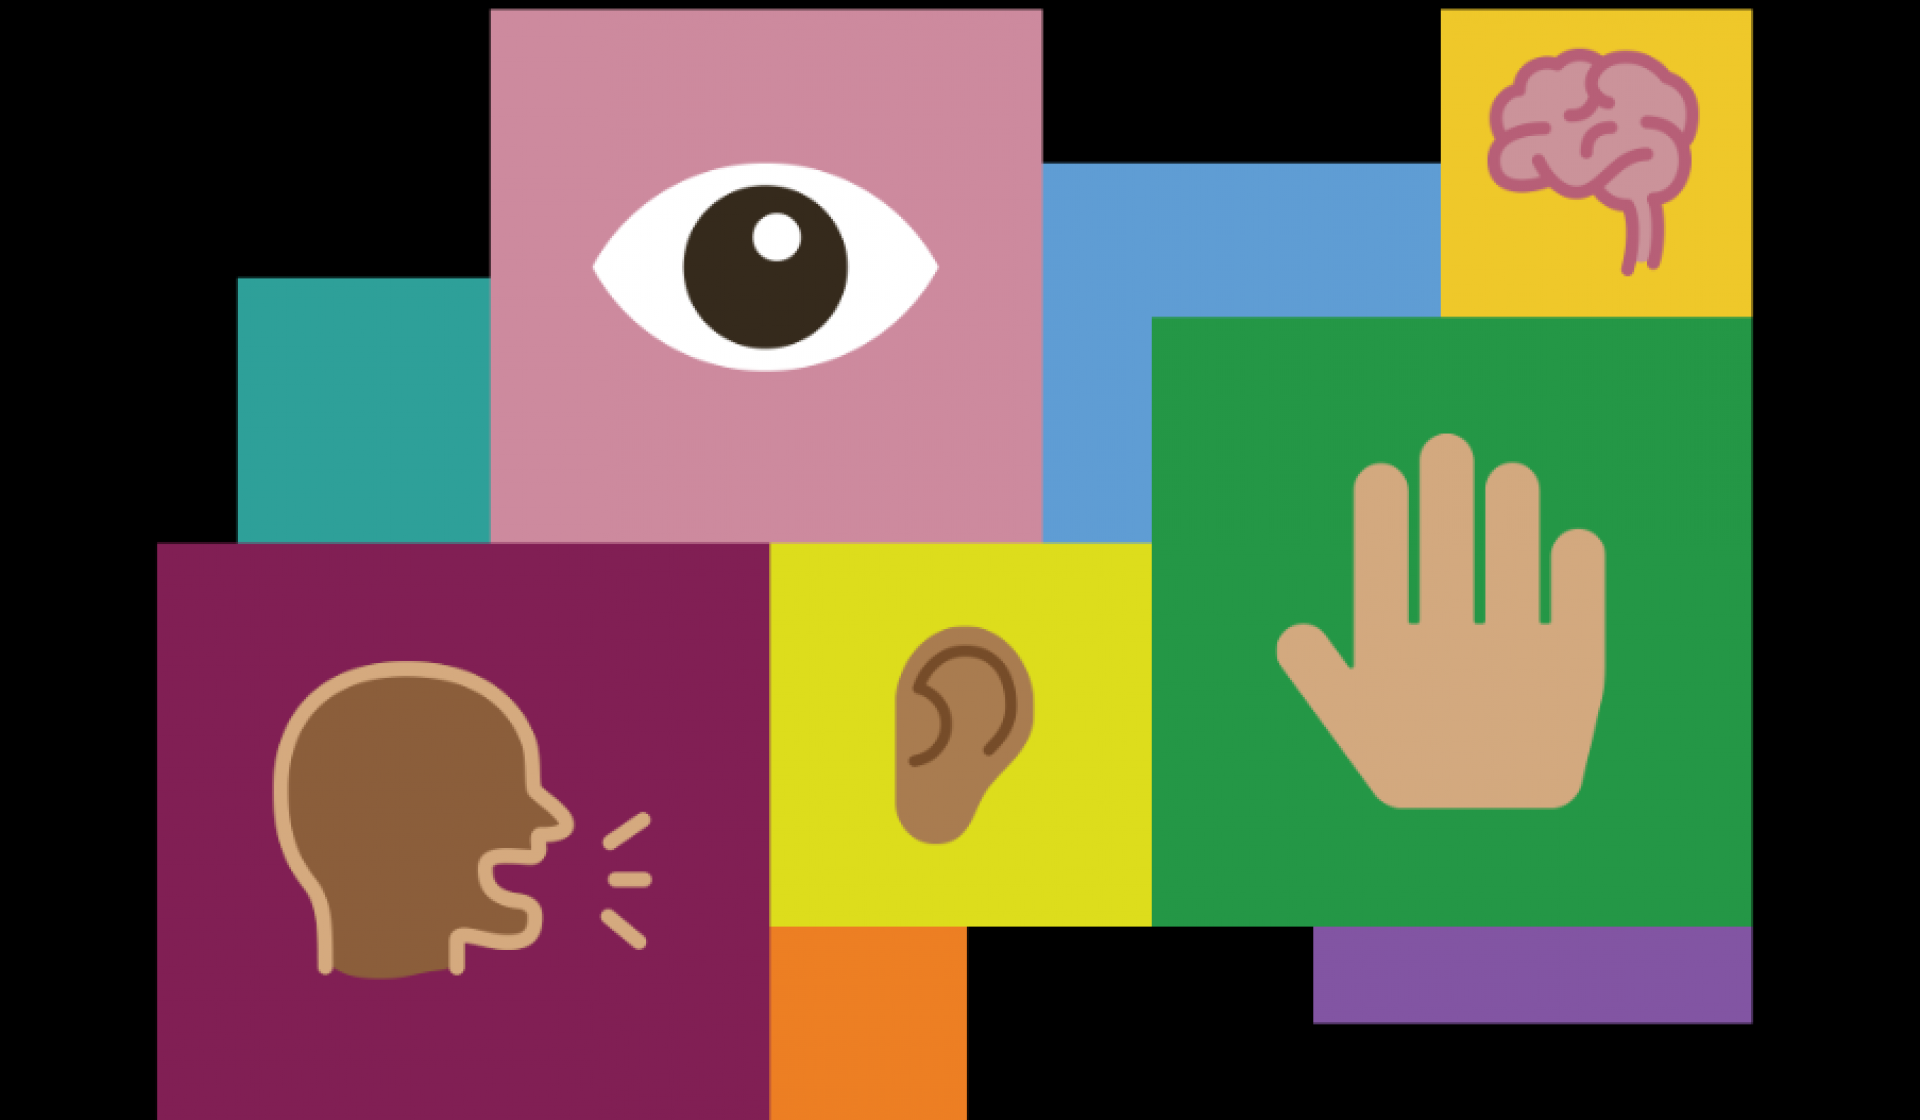 Illustration of a person speaking, an eye, an ear, a hand and a brain